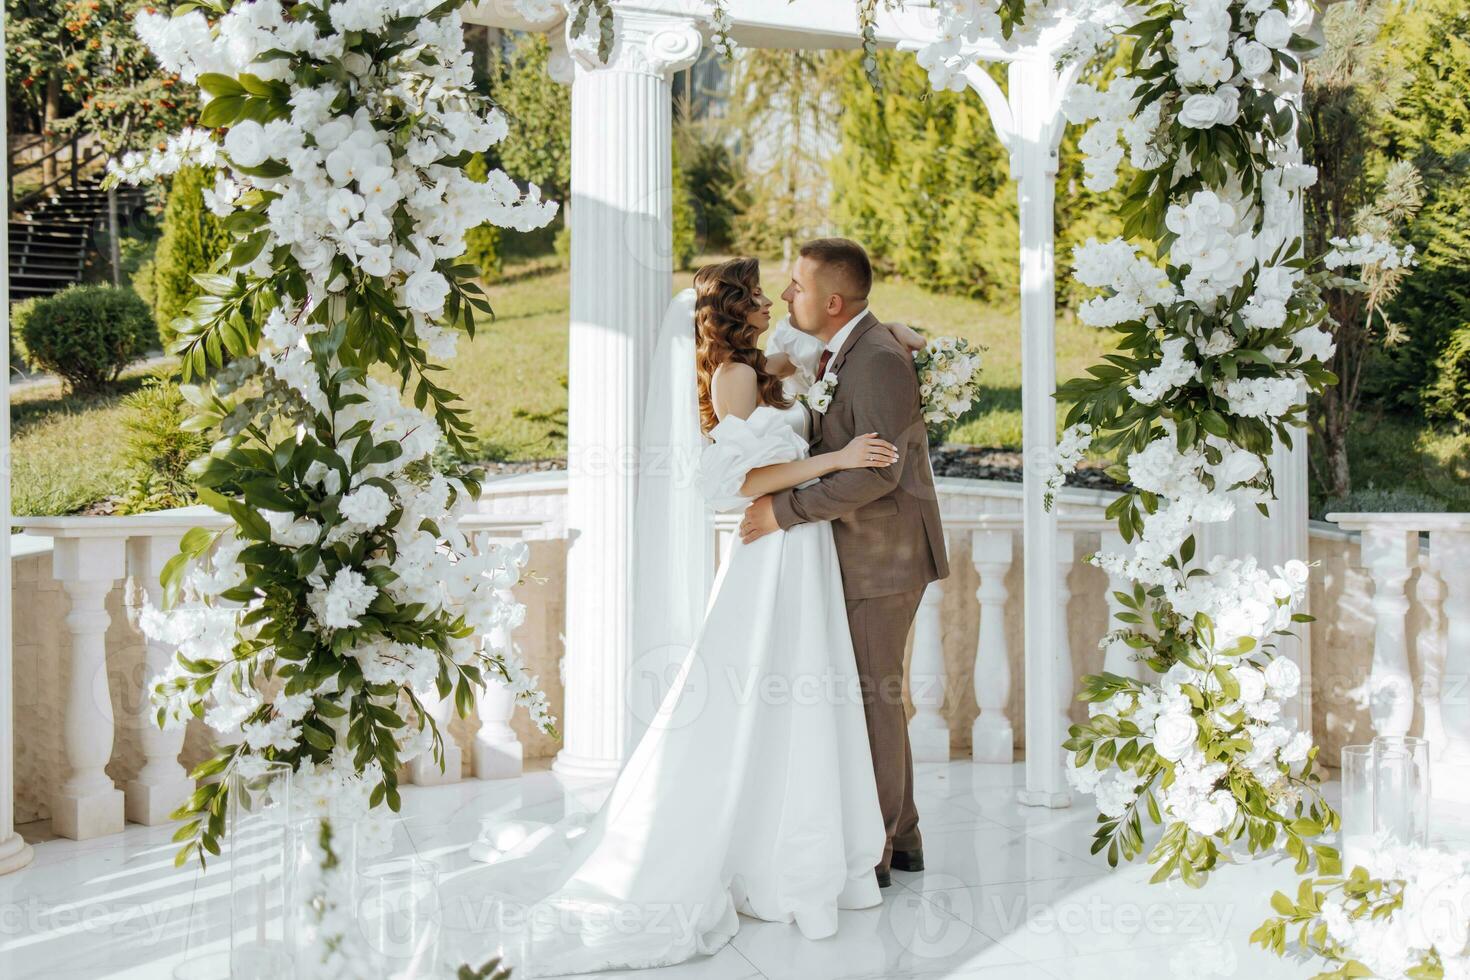 An elegant bride and groom pose together outdoors on a sunny wedding day against a background of flowers in a beautiful location. The groom gently hugs the bride and kisses her. photo